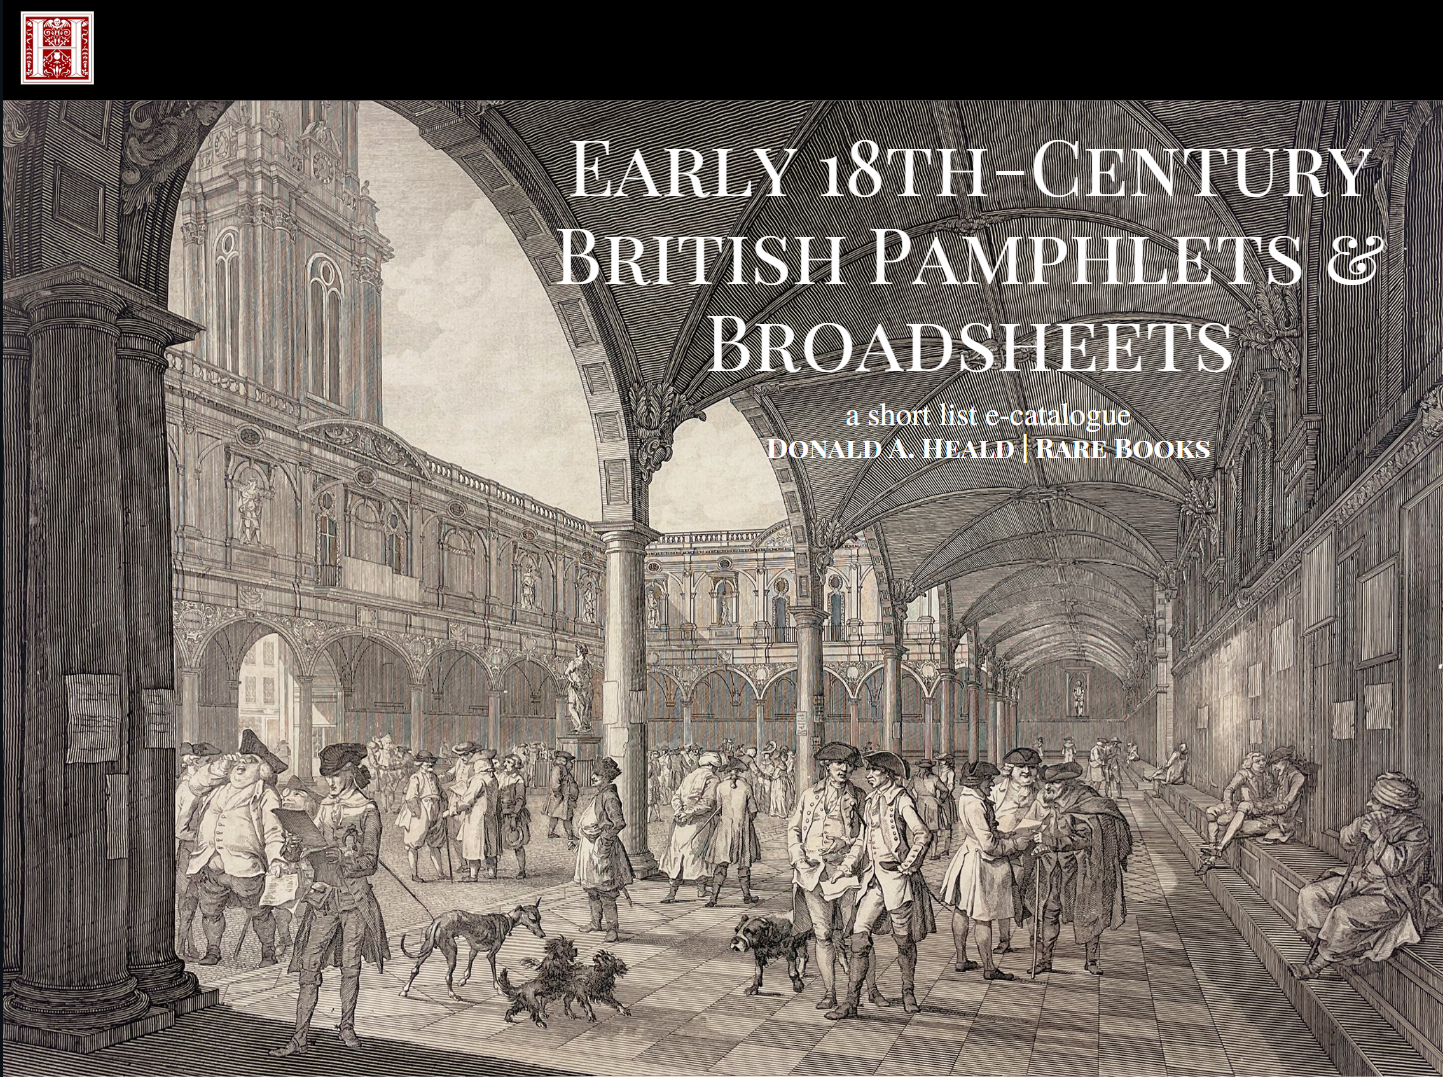 Early 18th Century British Pamphlets and Broadsheets